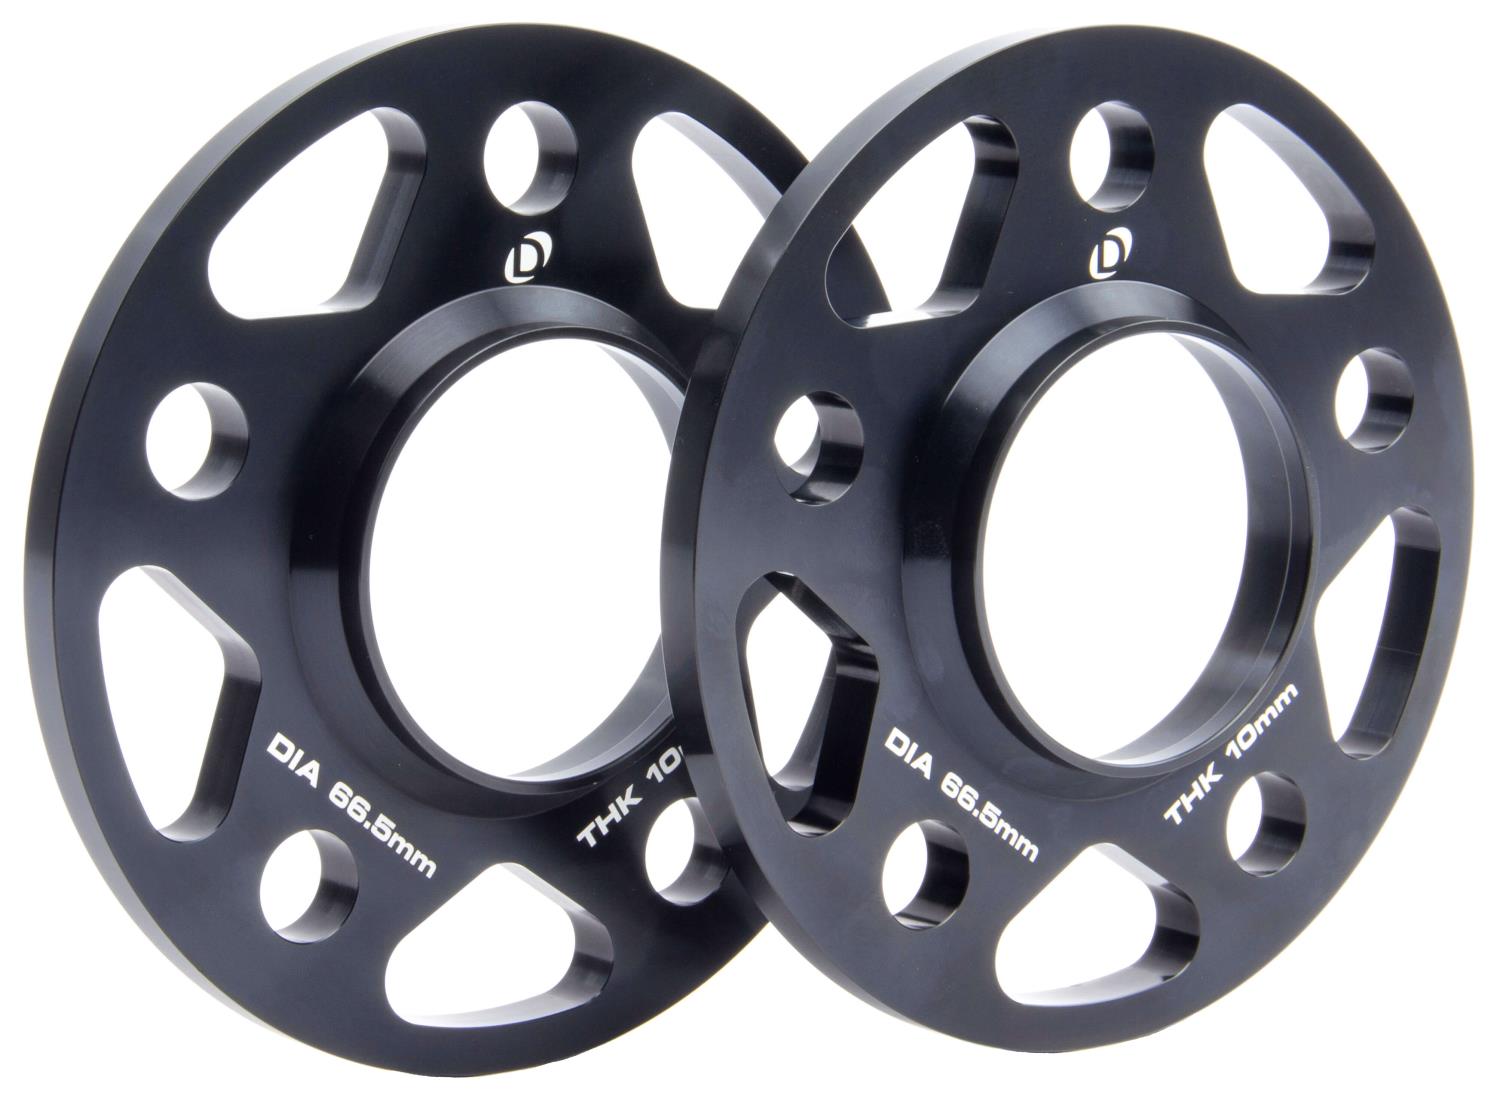 Machined Aluminum Wheel Spacers [10 mm Thick] for Select Late-Model BMW Cars/SUVs, Mini Cooper, Toyota GR Supra  [Black]